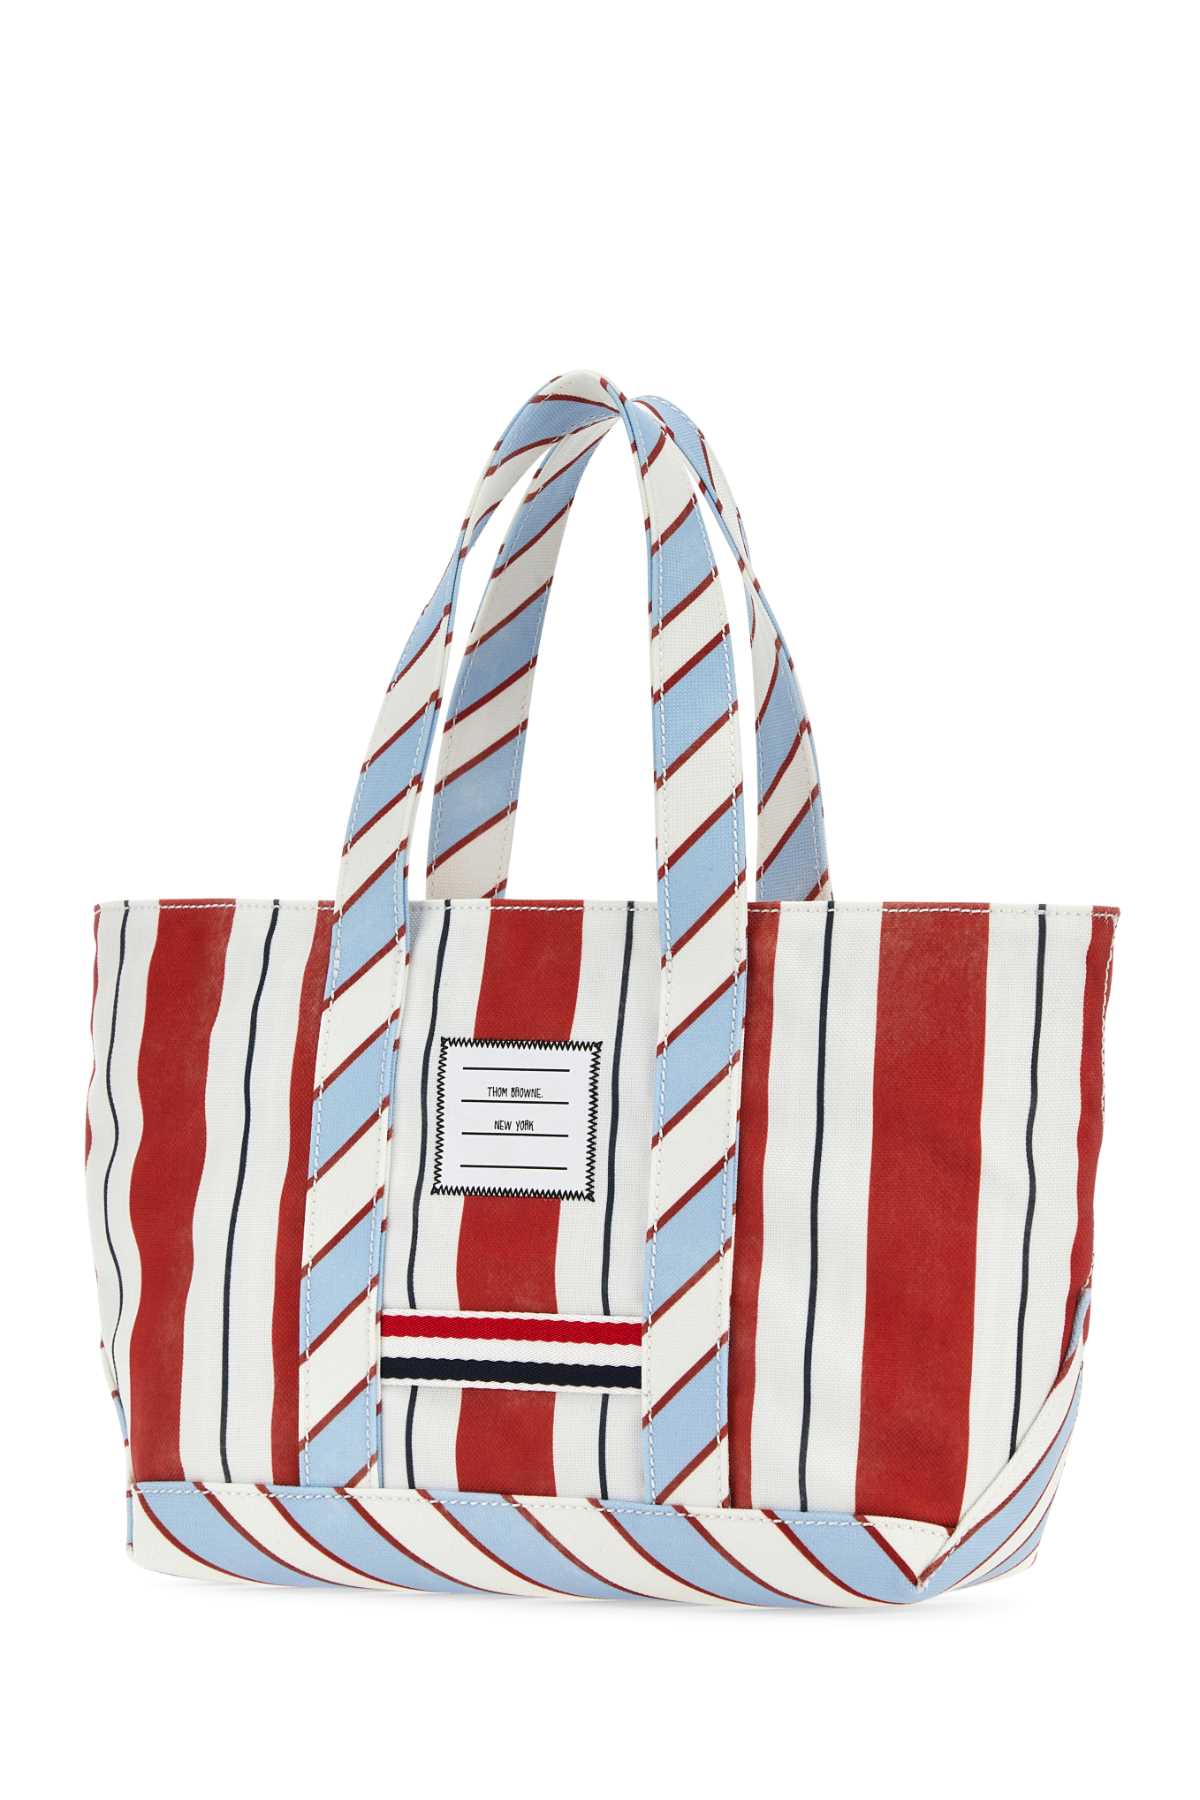 Thom Browne Printed Canvas Small Handbag In Red